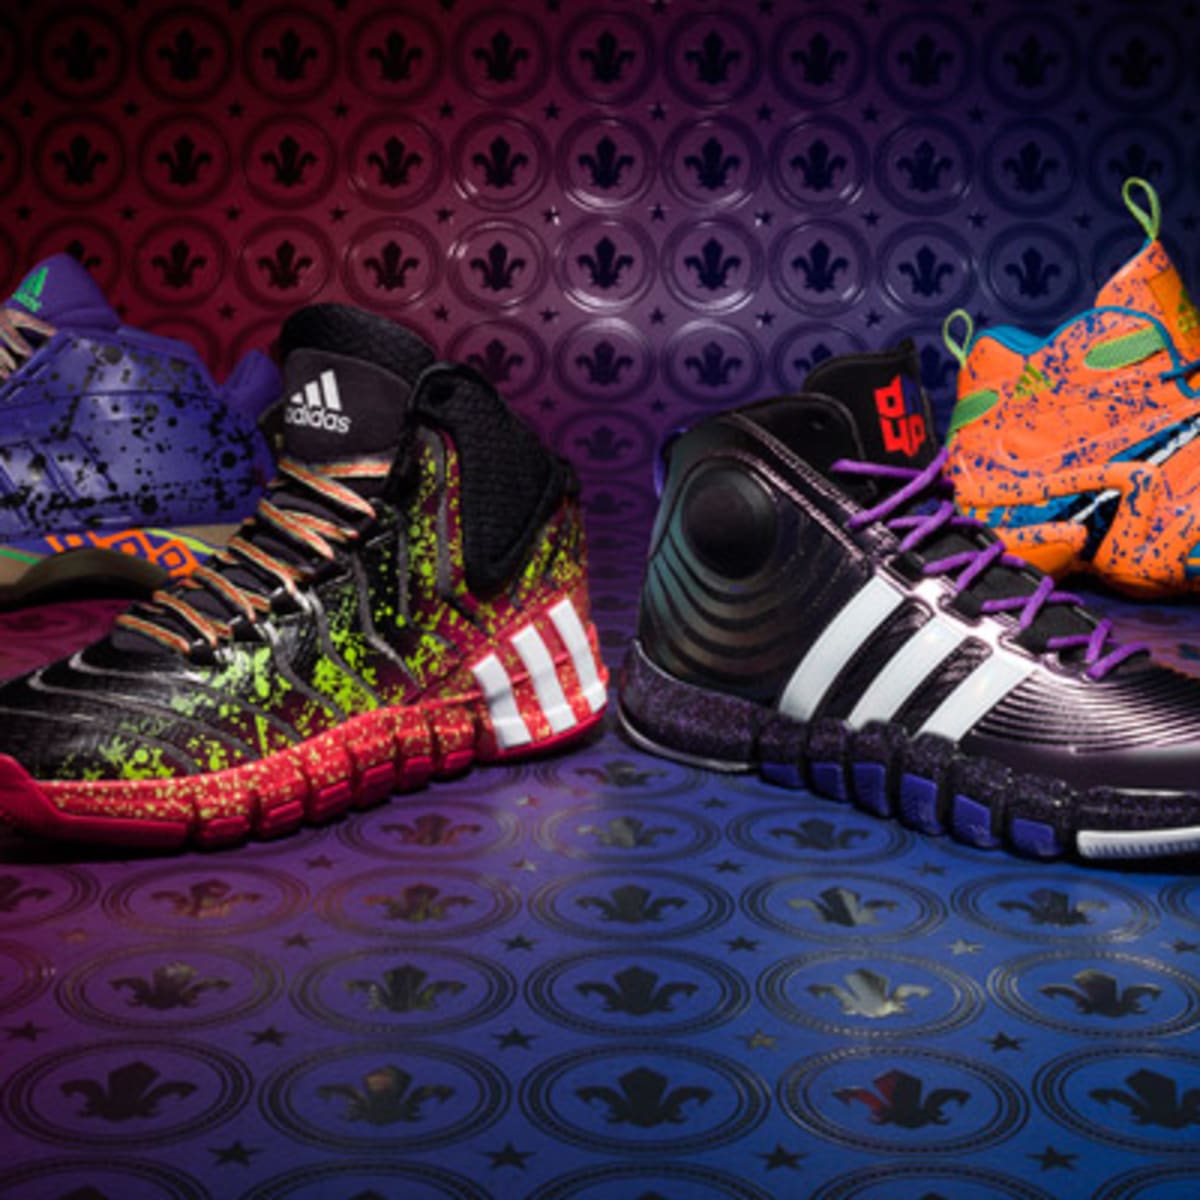 Dempsey débiles Siete Adidas unveils All-Star Game sneakers for Dwight Howard, Damian Lillard,  John Wall - Sports Illustrated